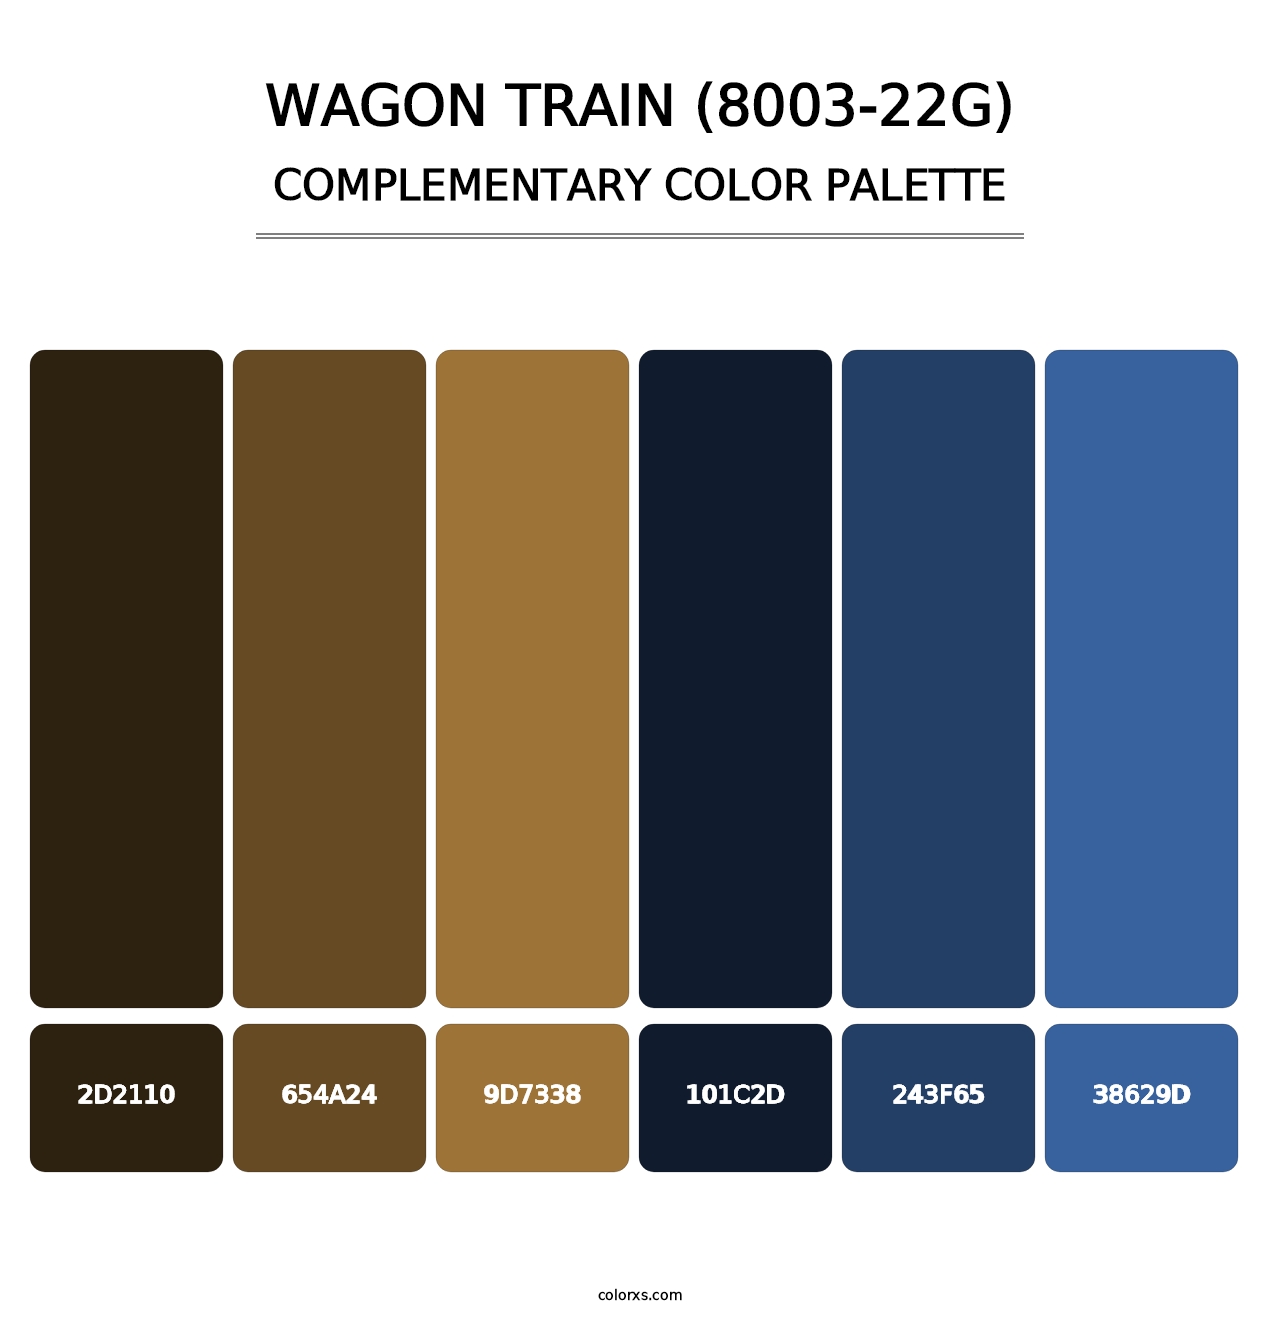 Wagon Train (8003-22G) - Complementary Color Palette